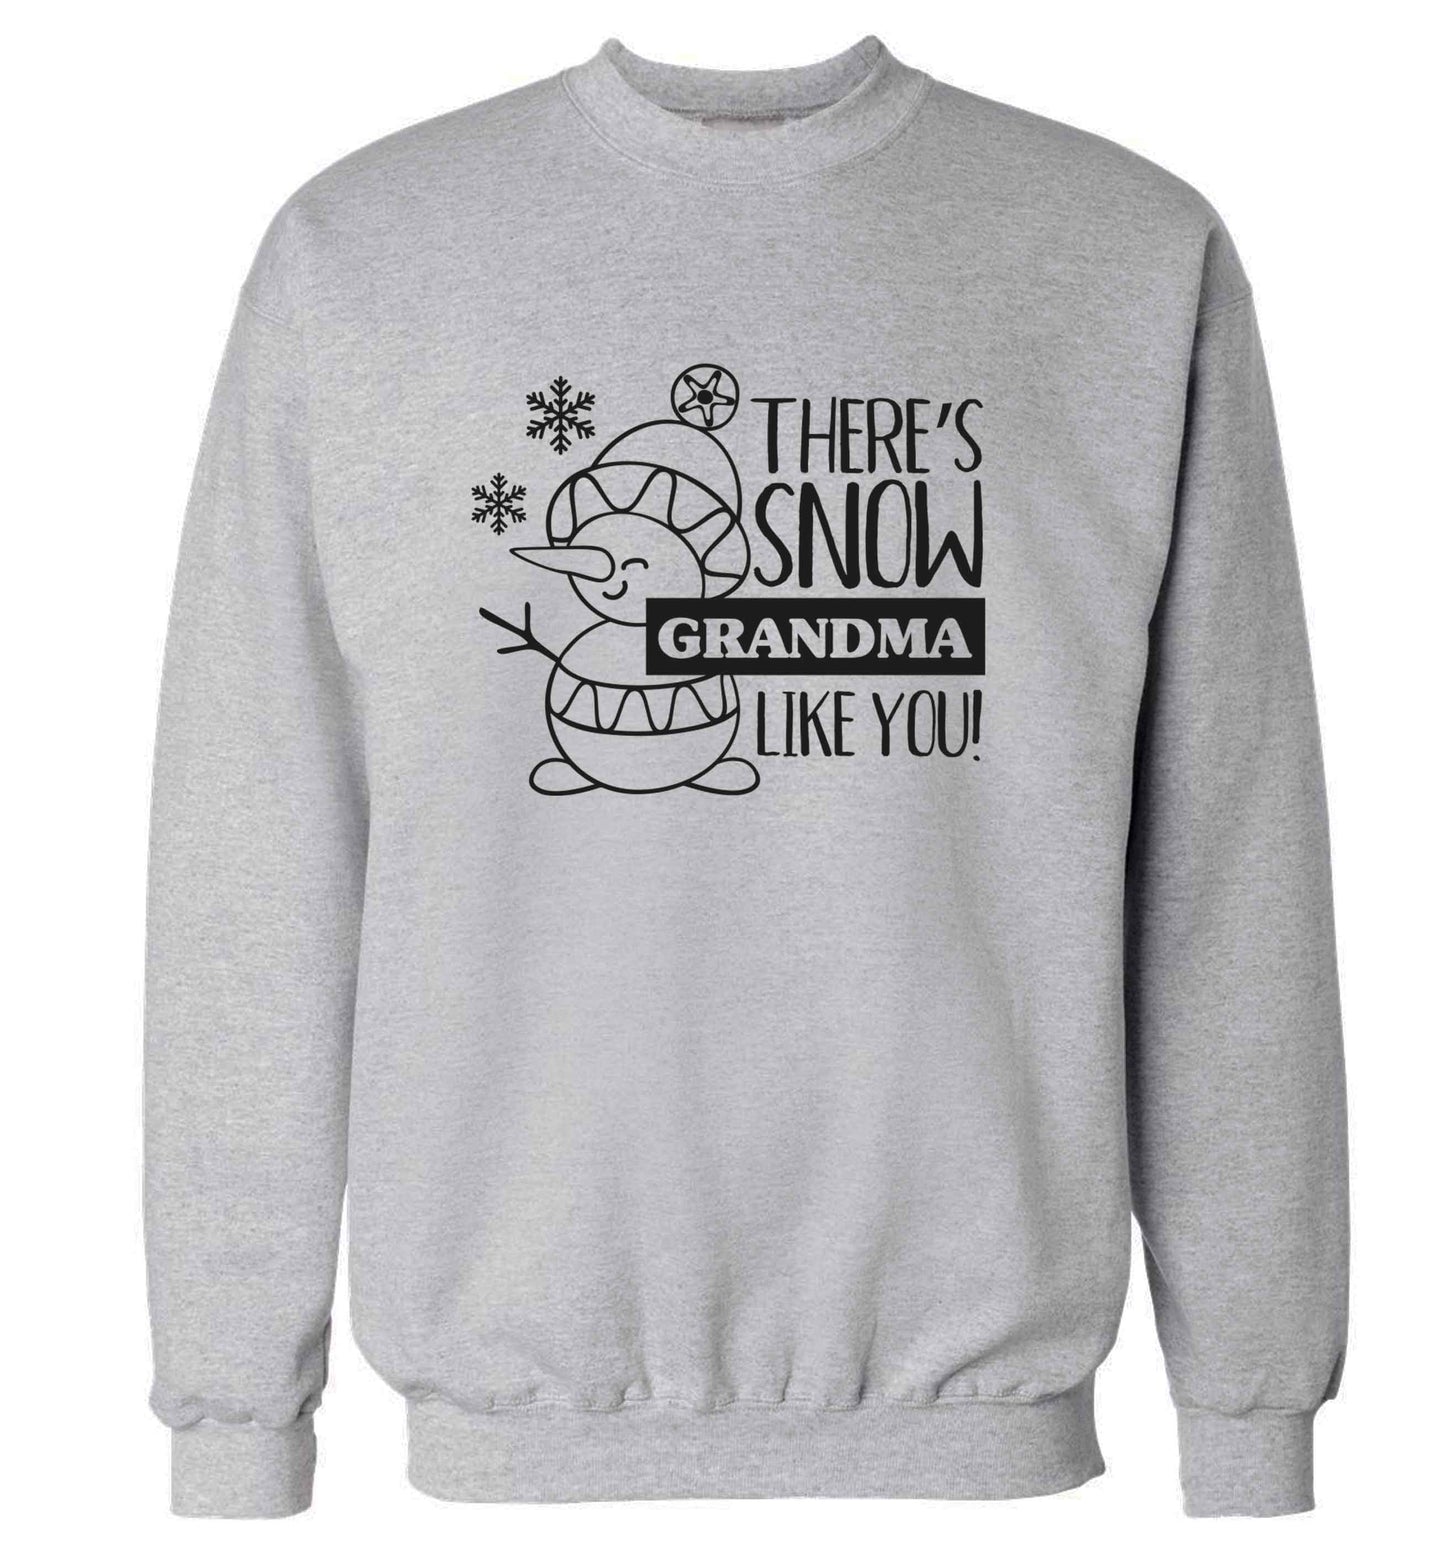 There's snow grandma like you adult's unisex grey sweater 2XL